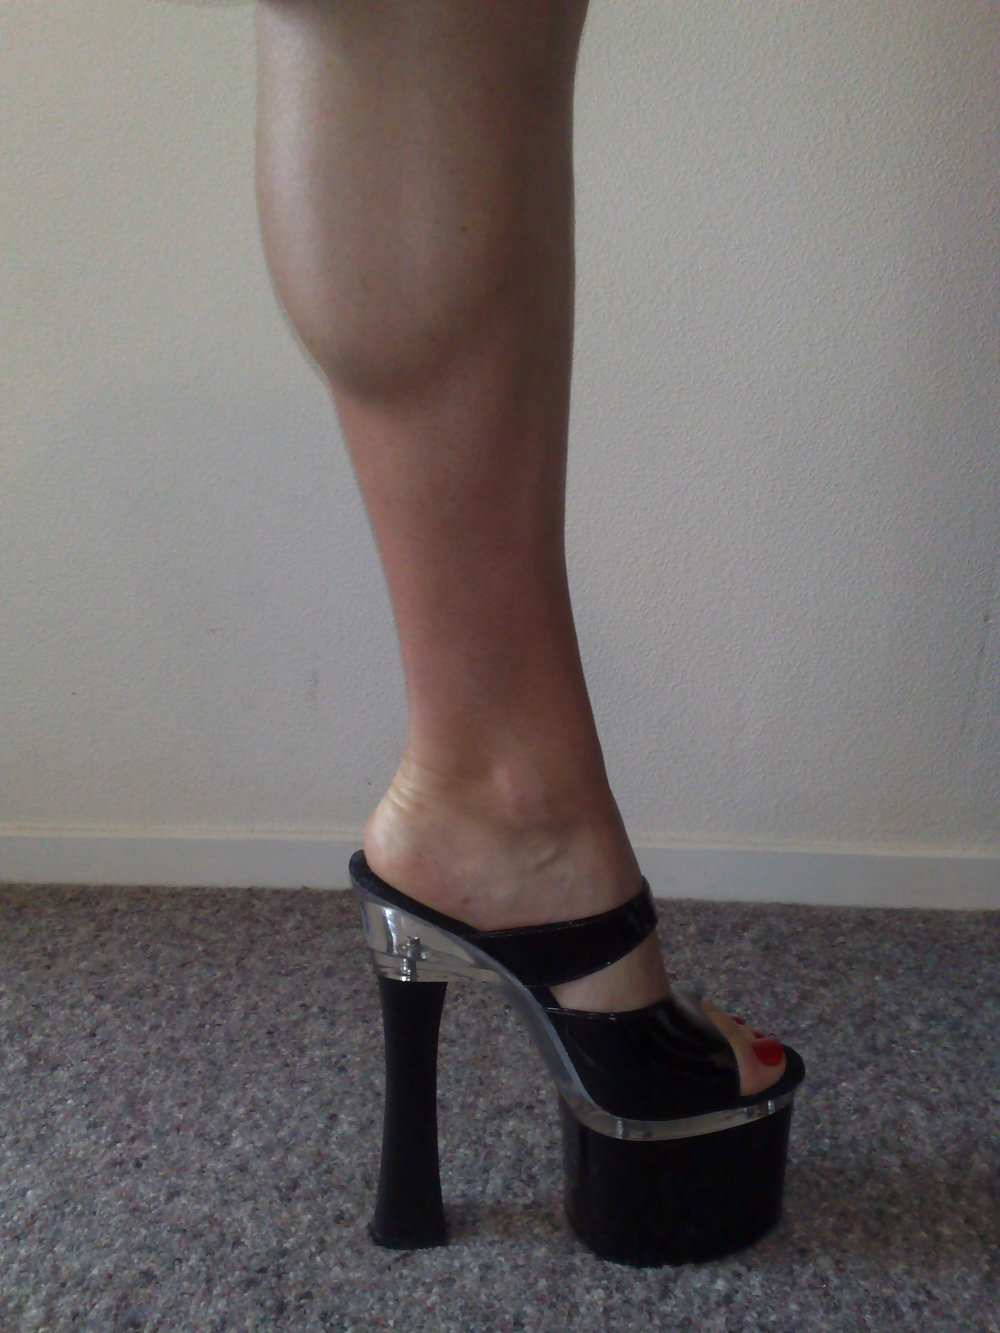 Sexy heels, feet and a little bit of cock #3660981